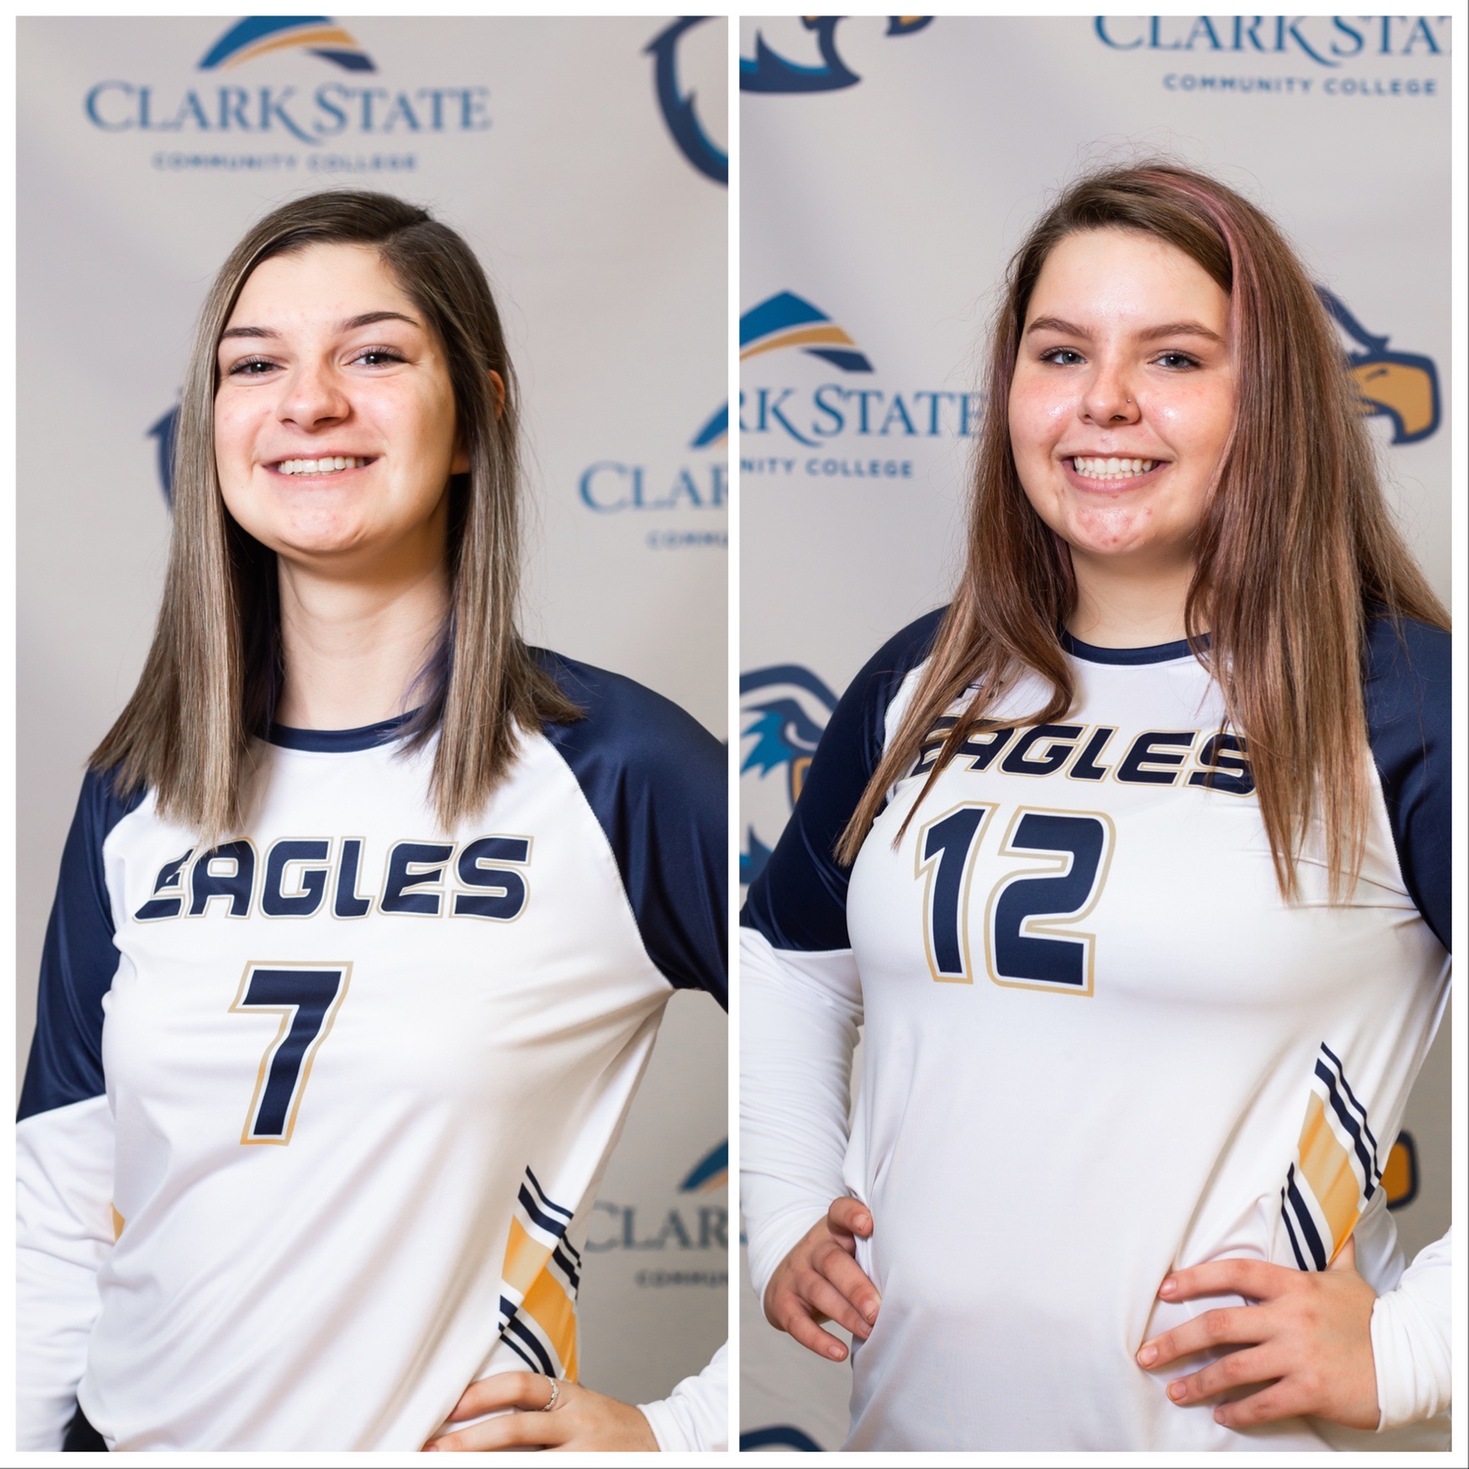 Hannah Walls (7) was selected to both the All-OCCAC First Team and the All-OCCAC Freshman Team. Taylea Achtermann (12) won a spot on the All-OCCAC Honorable Mention Team.